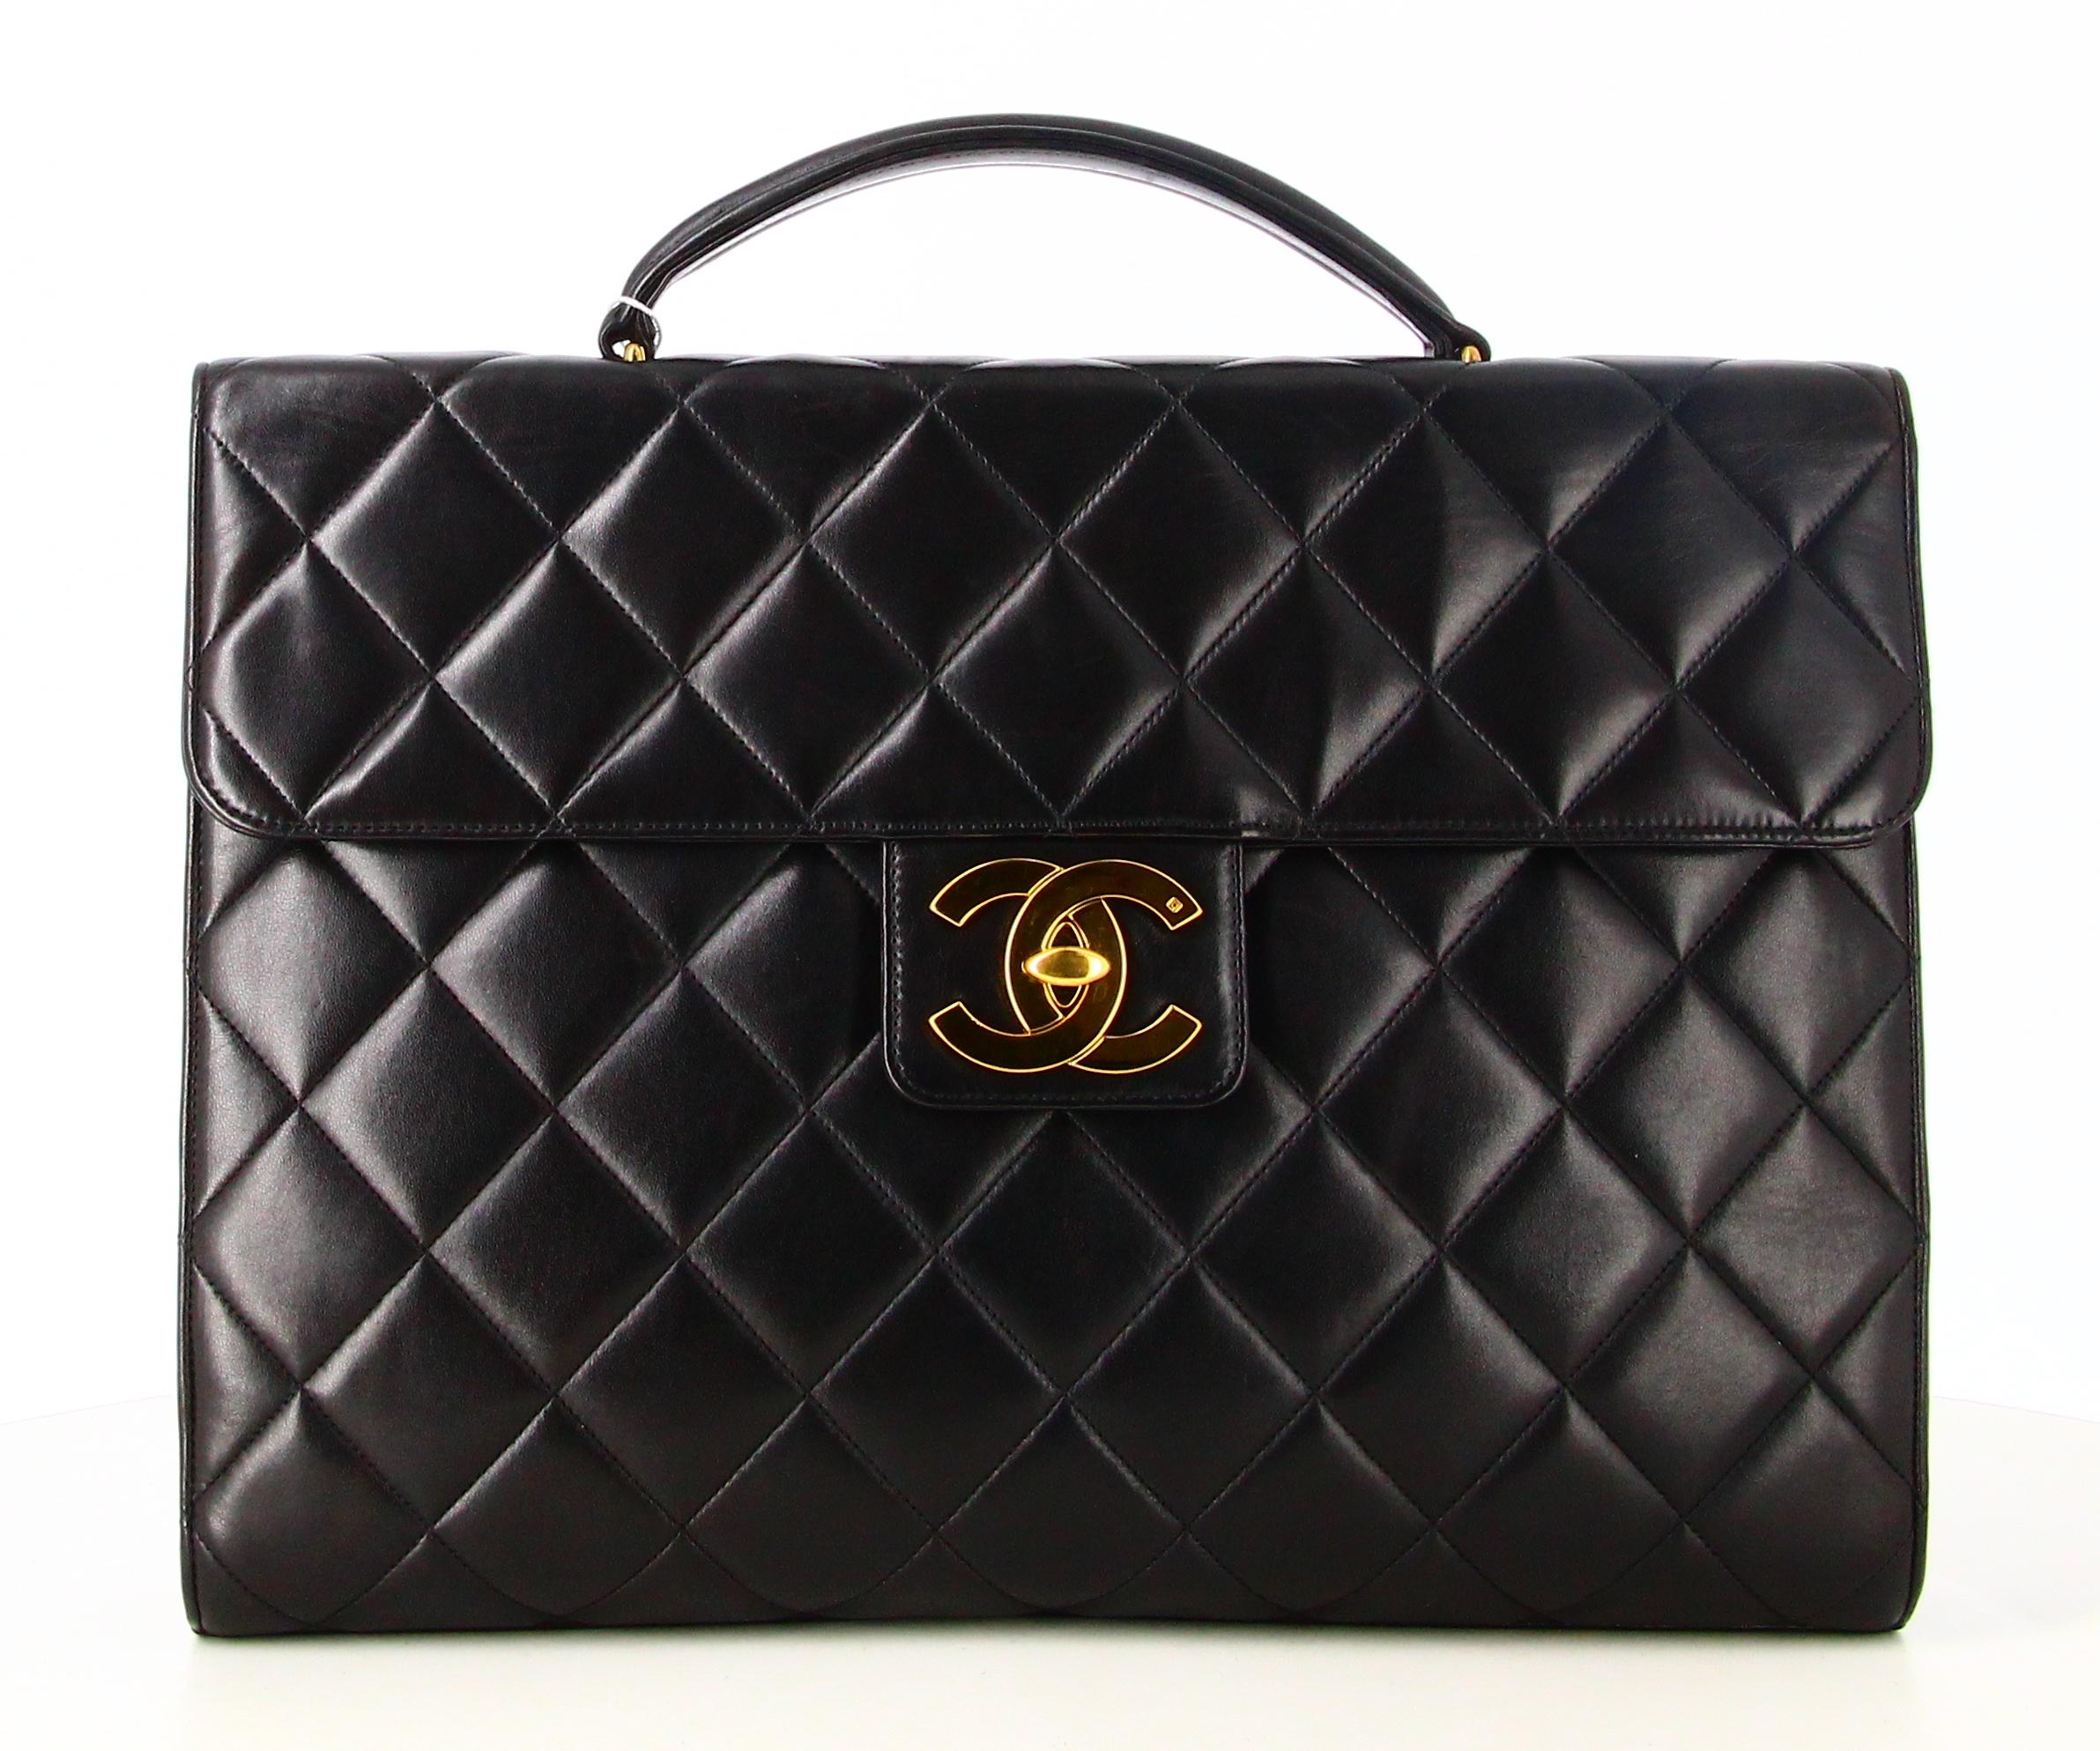 1994 CC Lambskin Business Bag Chanel Matelassé

- Very good condition. Shows very slight signs of wear over time.
- Chanel business bag
- Black quilted leather
- Small black leather strap
- Clasp: double C golden 
- Interior: bugundy leather plus